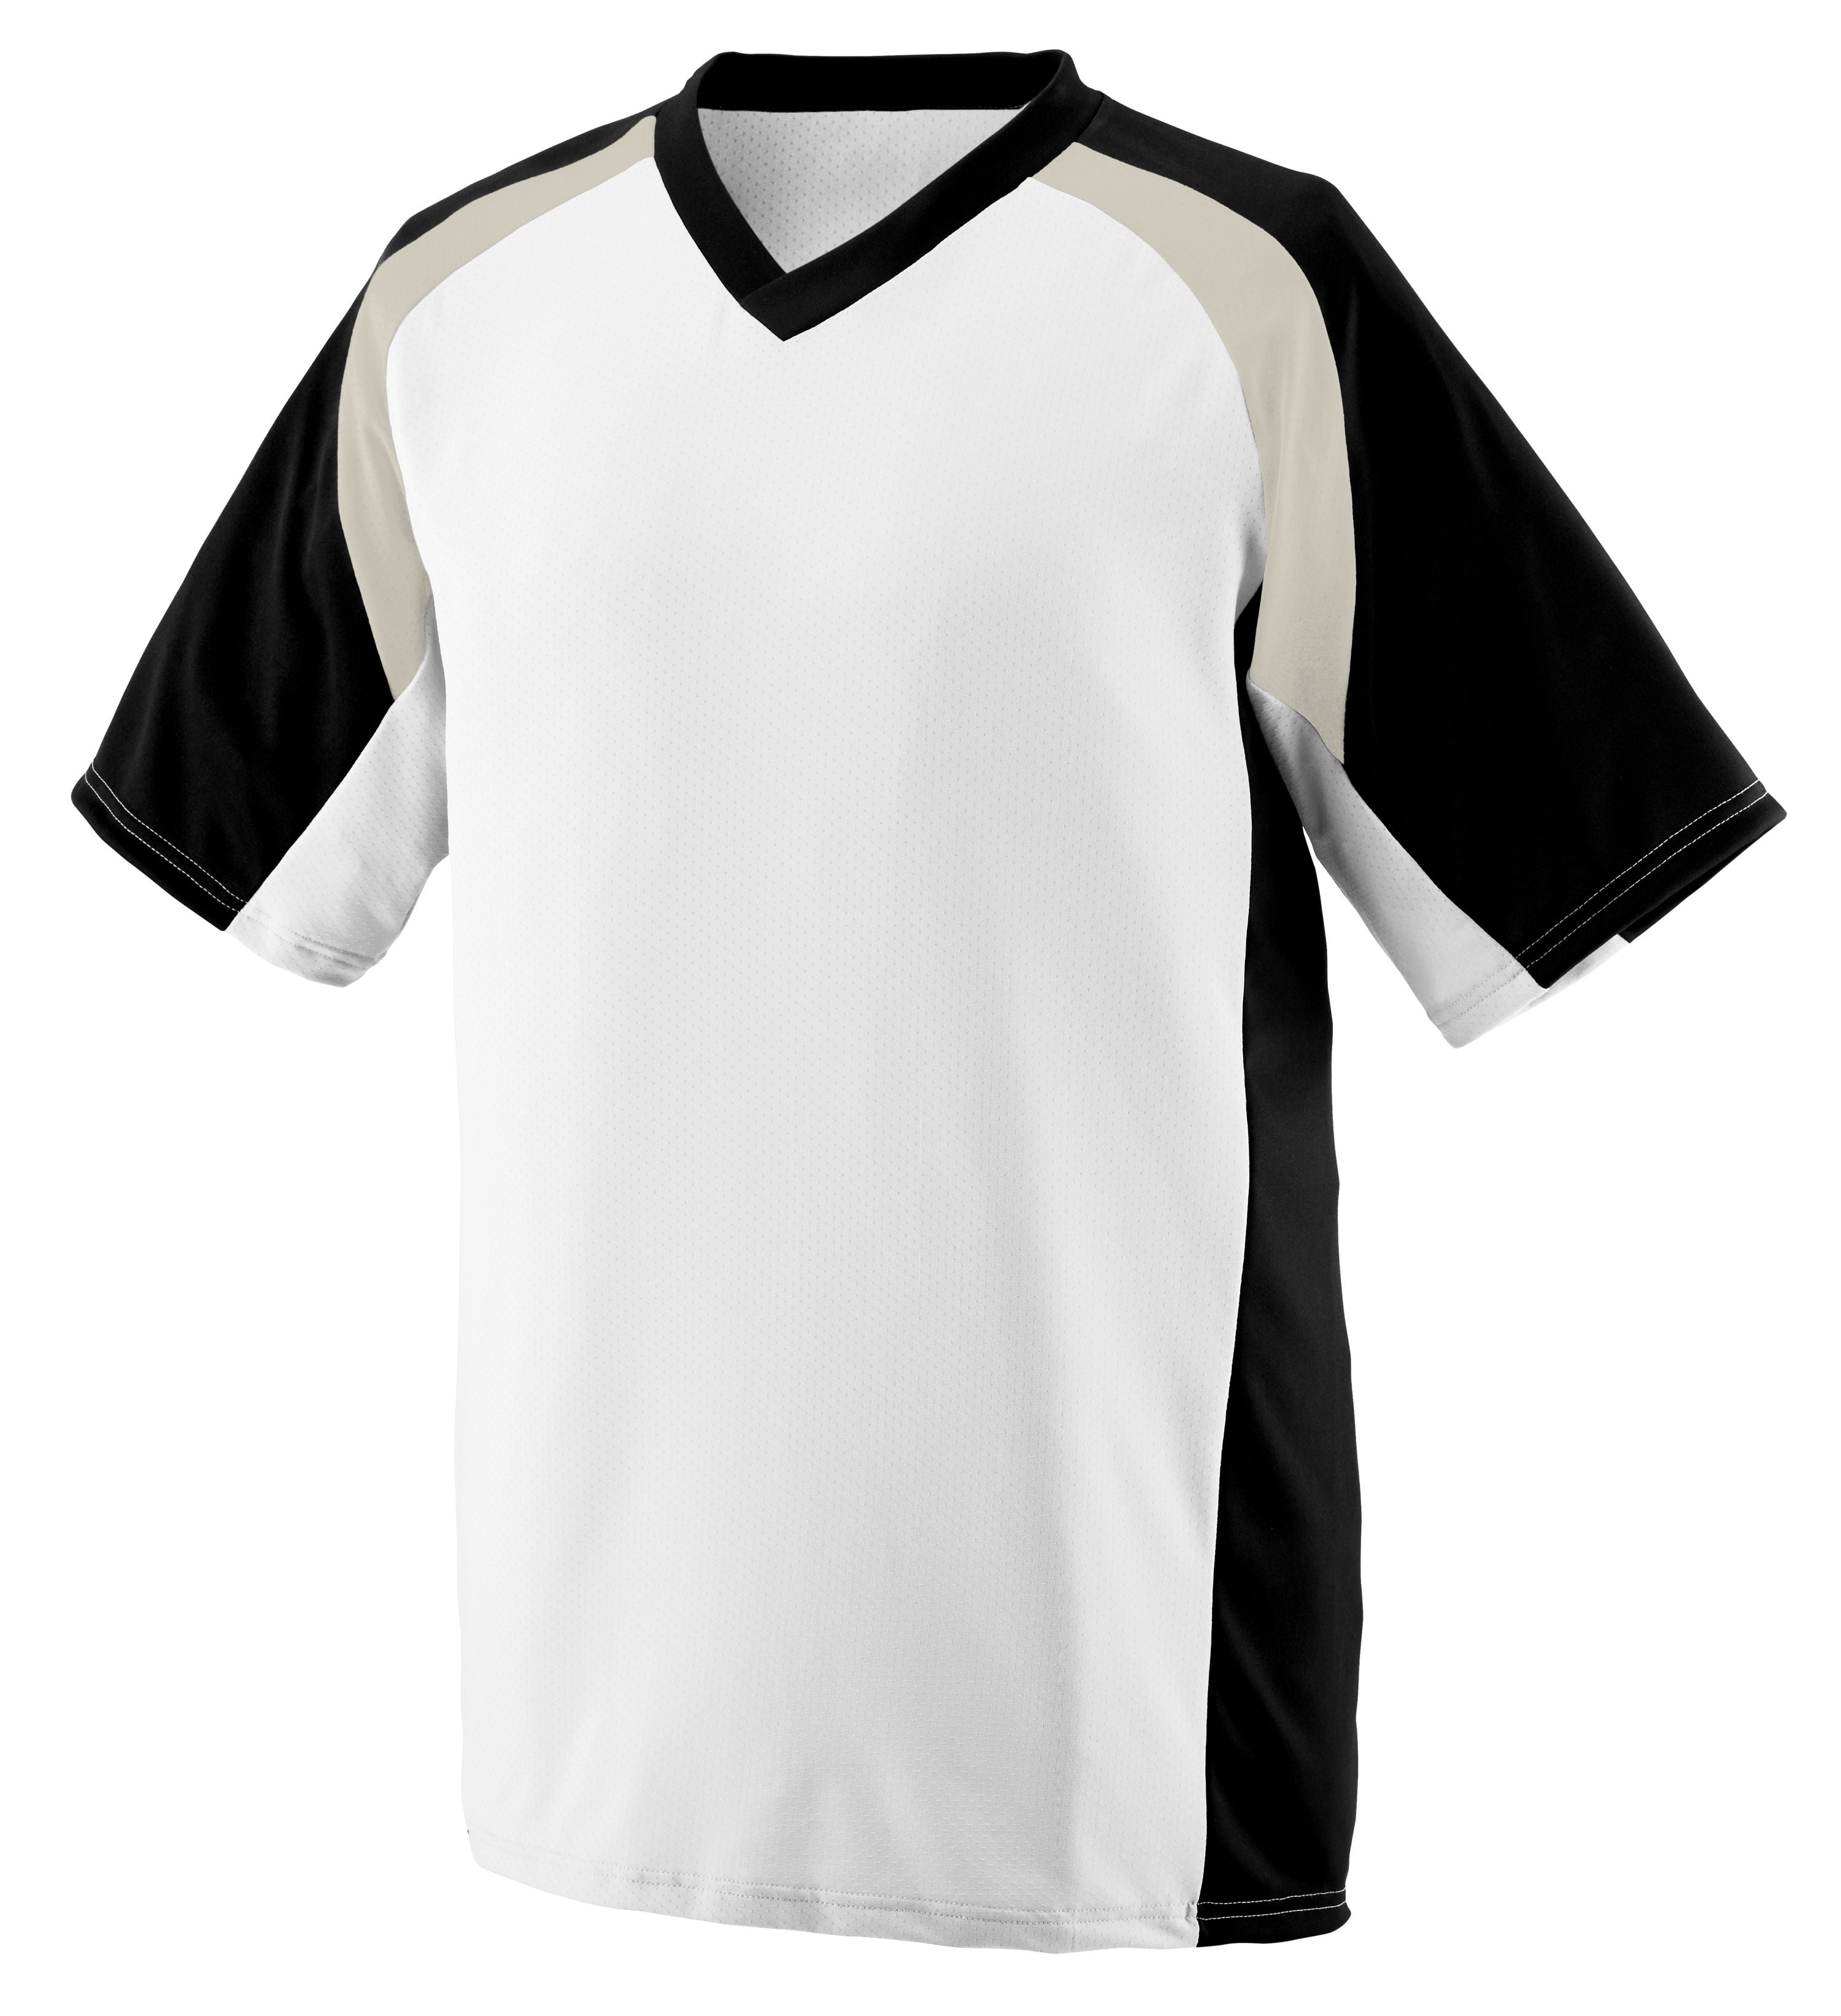 Augusta Sportswear Nitro Jersey in White/Black/Silver Grey  -Part of the Adult, Adult-Jersey, Augusta-Products, Football, Shirts, All-Sports, All-Sports-1 product lines at KanaleyCreations.com